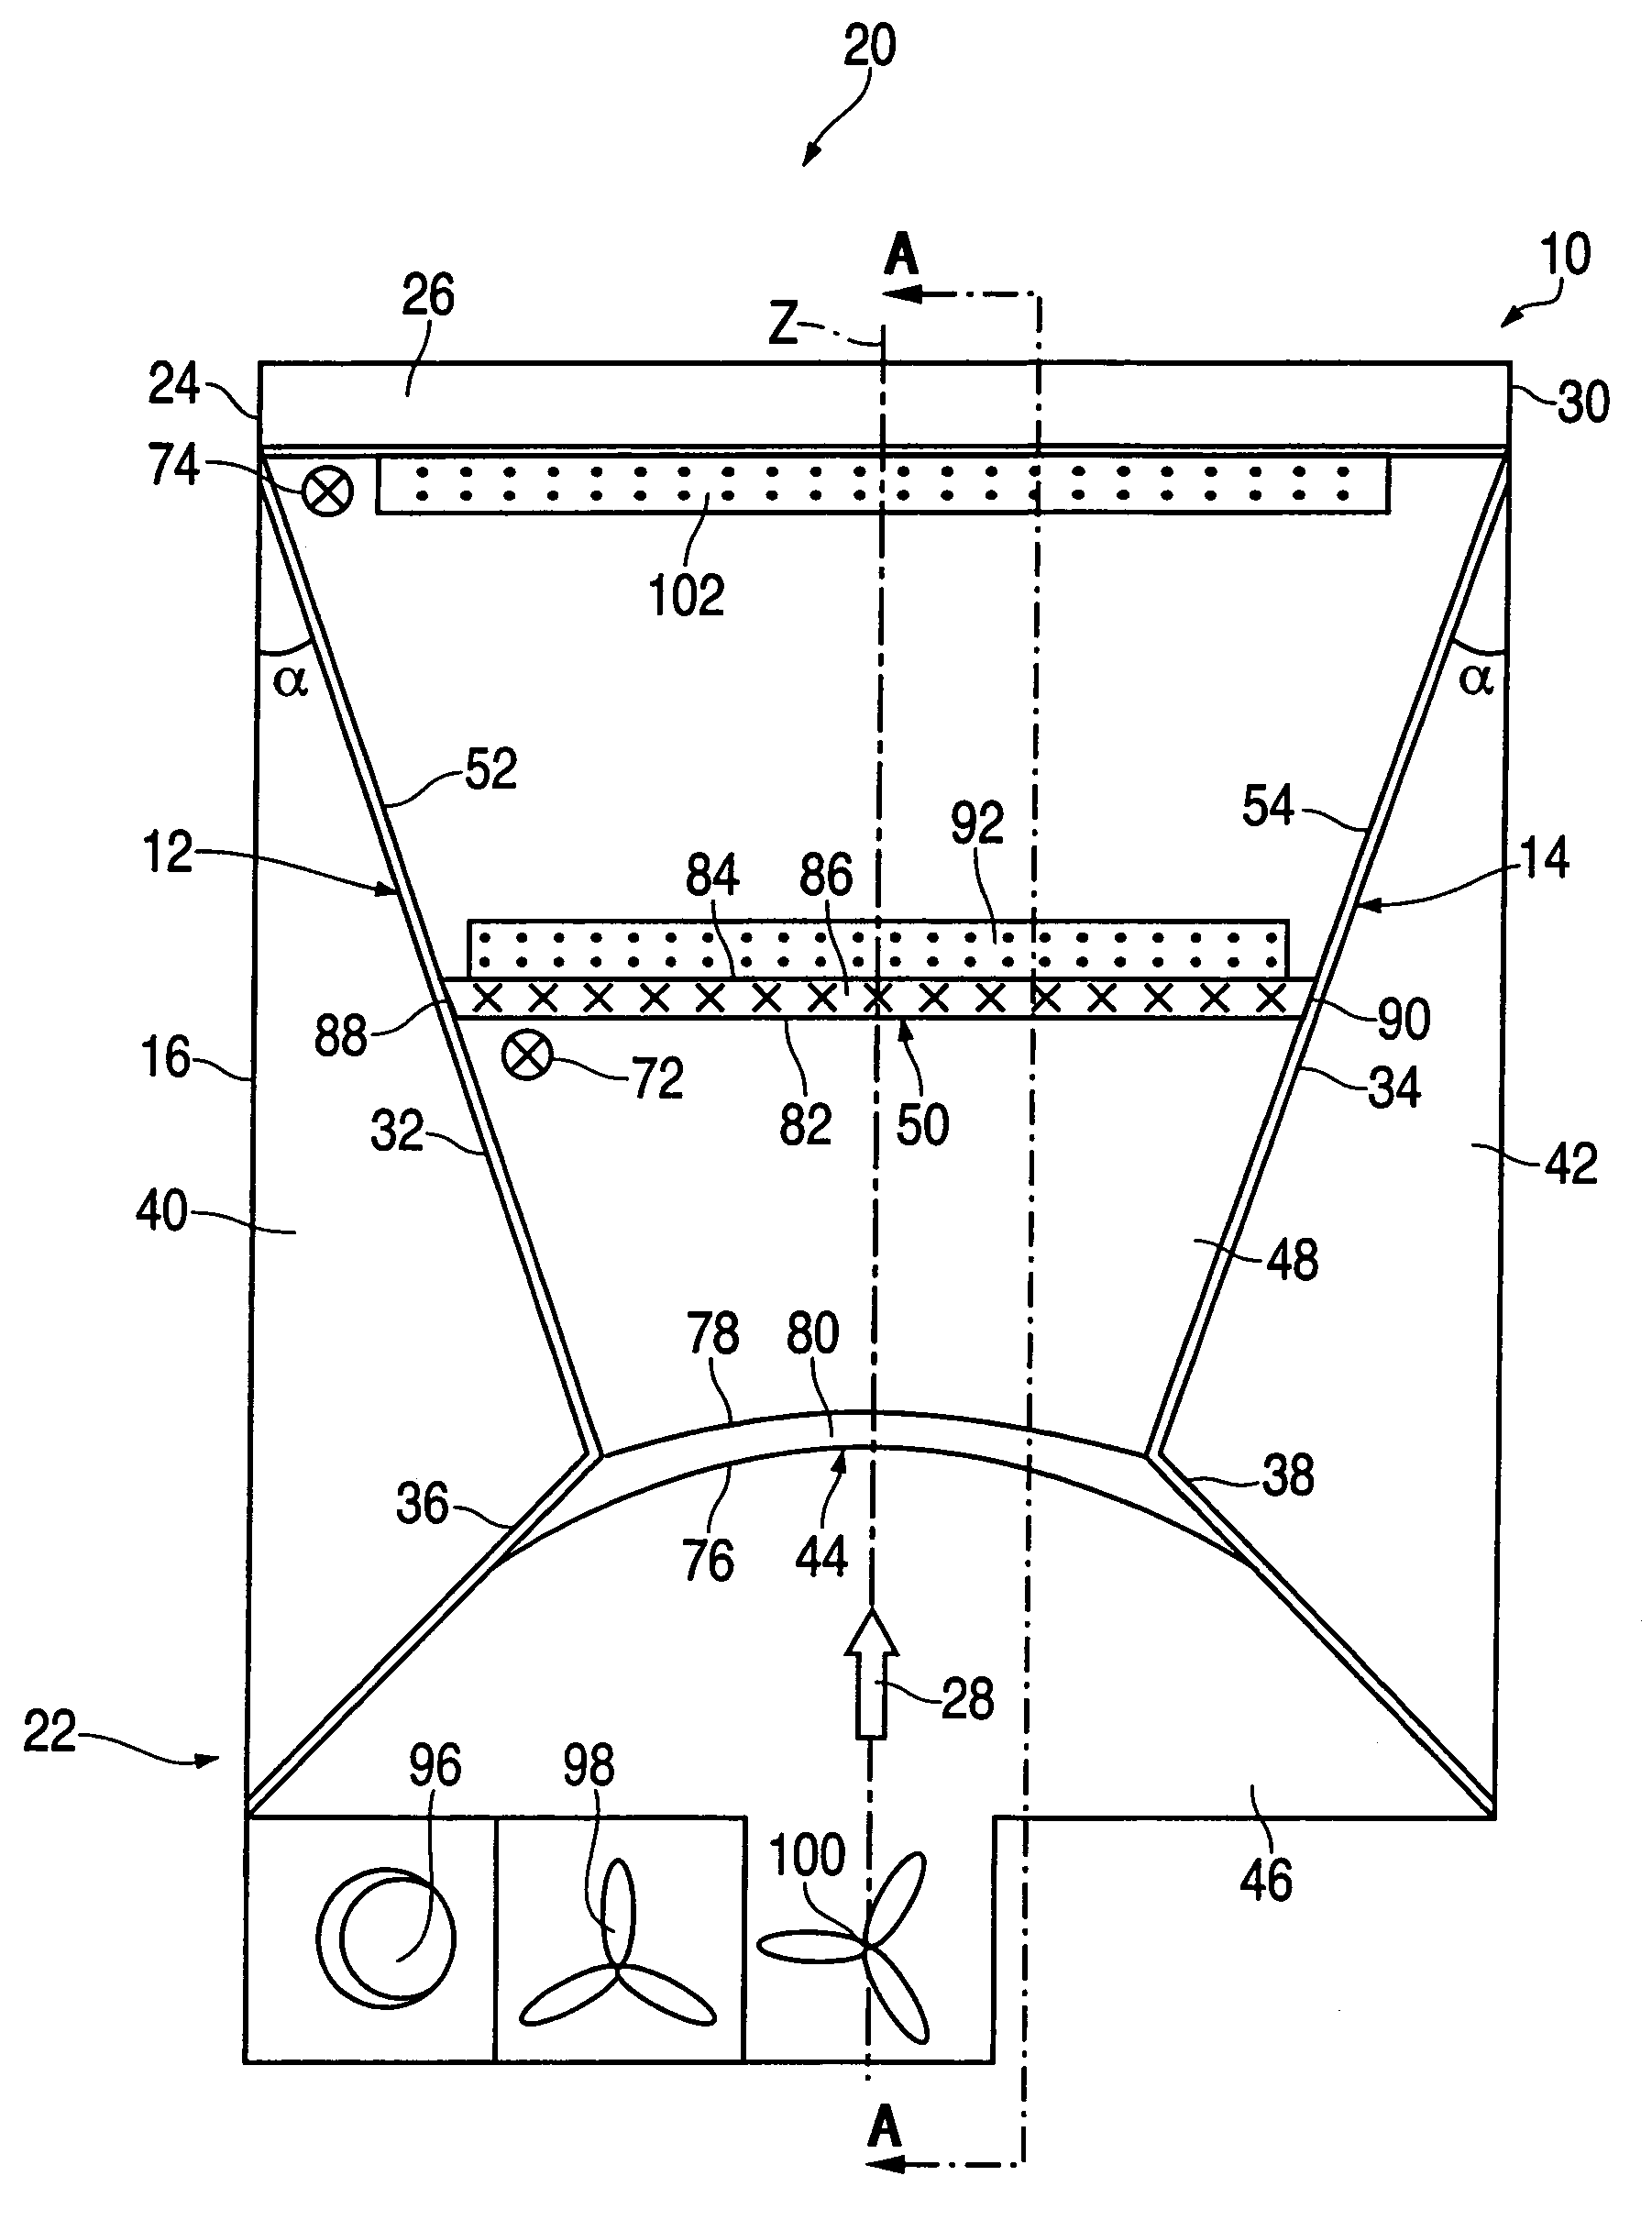 Cylindrical mixer-settler apparatus and method